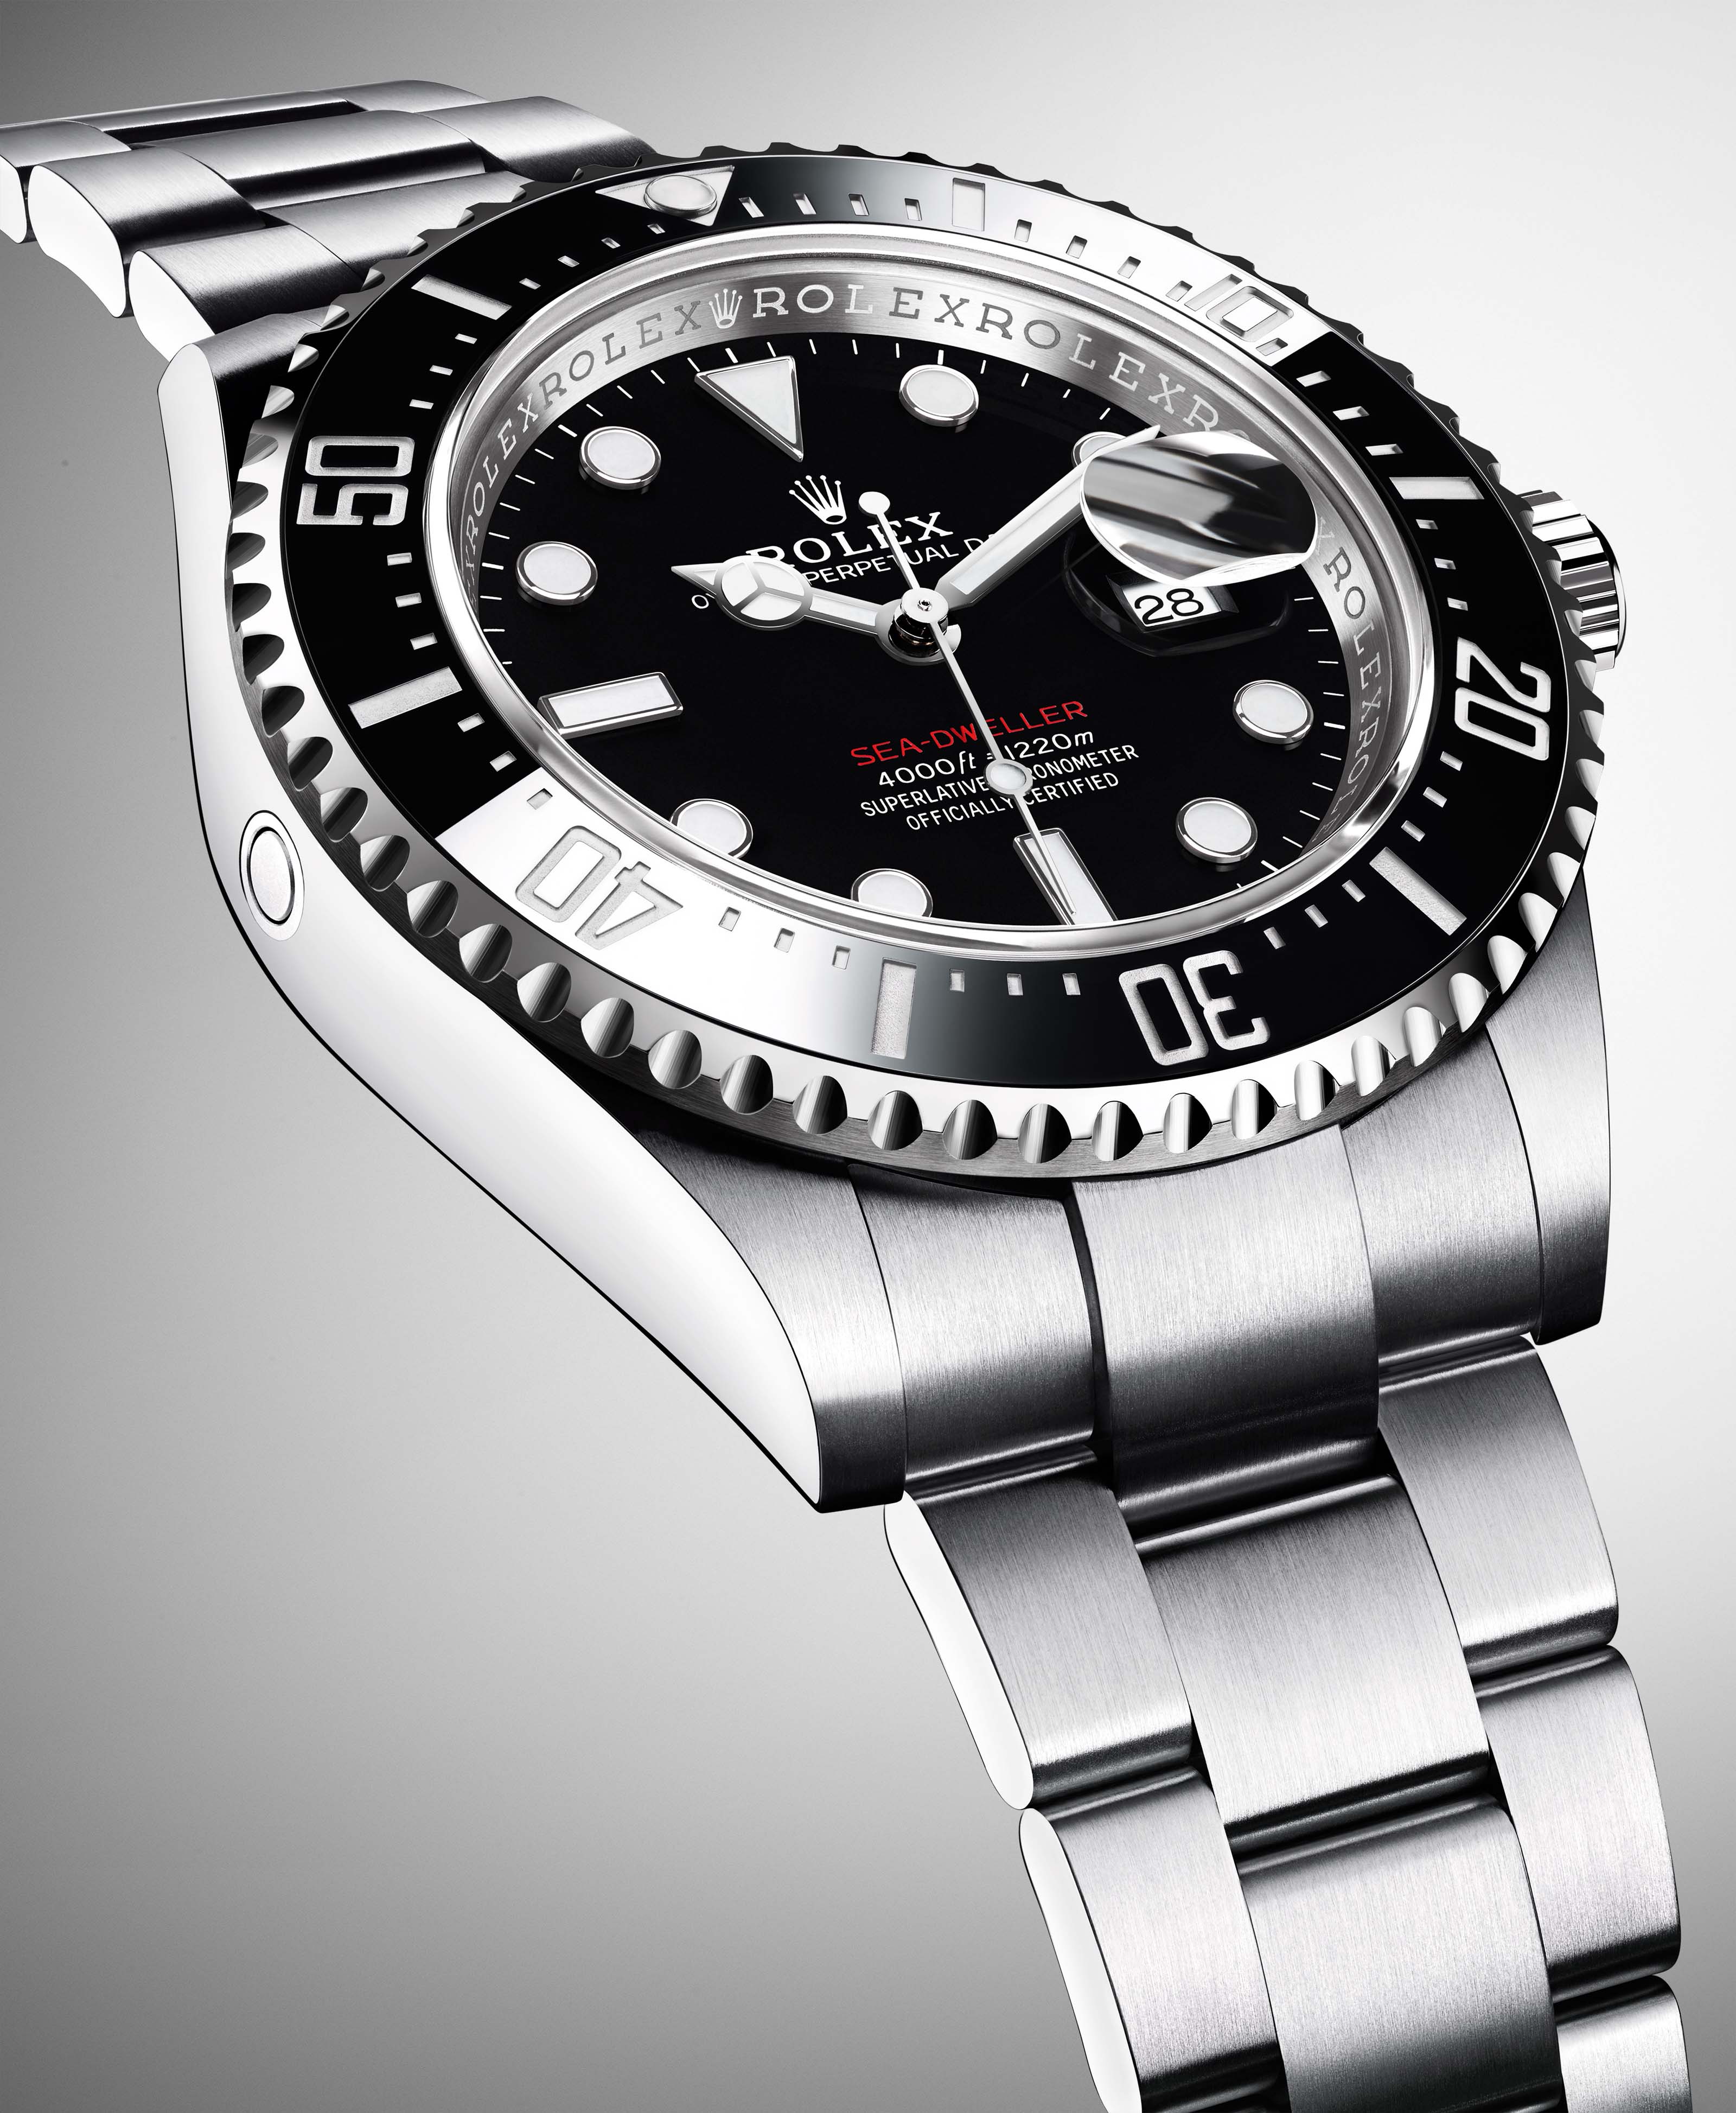 The Rolex Oyster Perpetual Sea-Dweller 